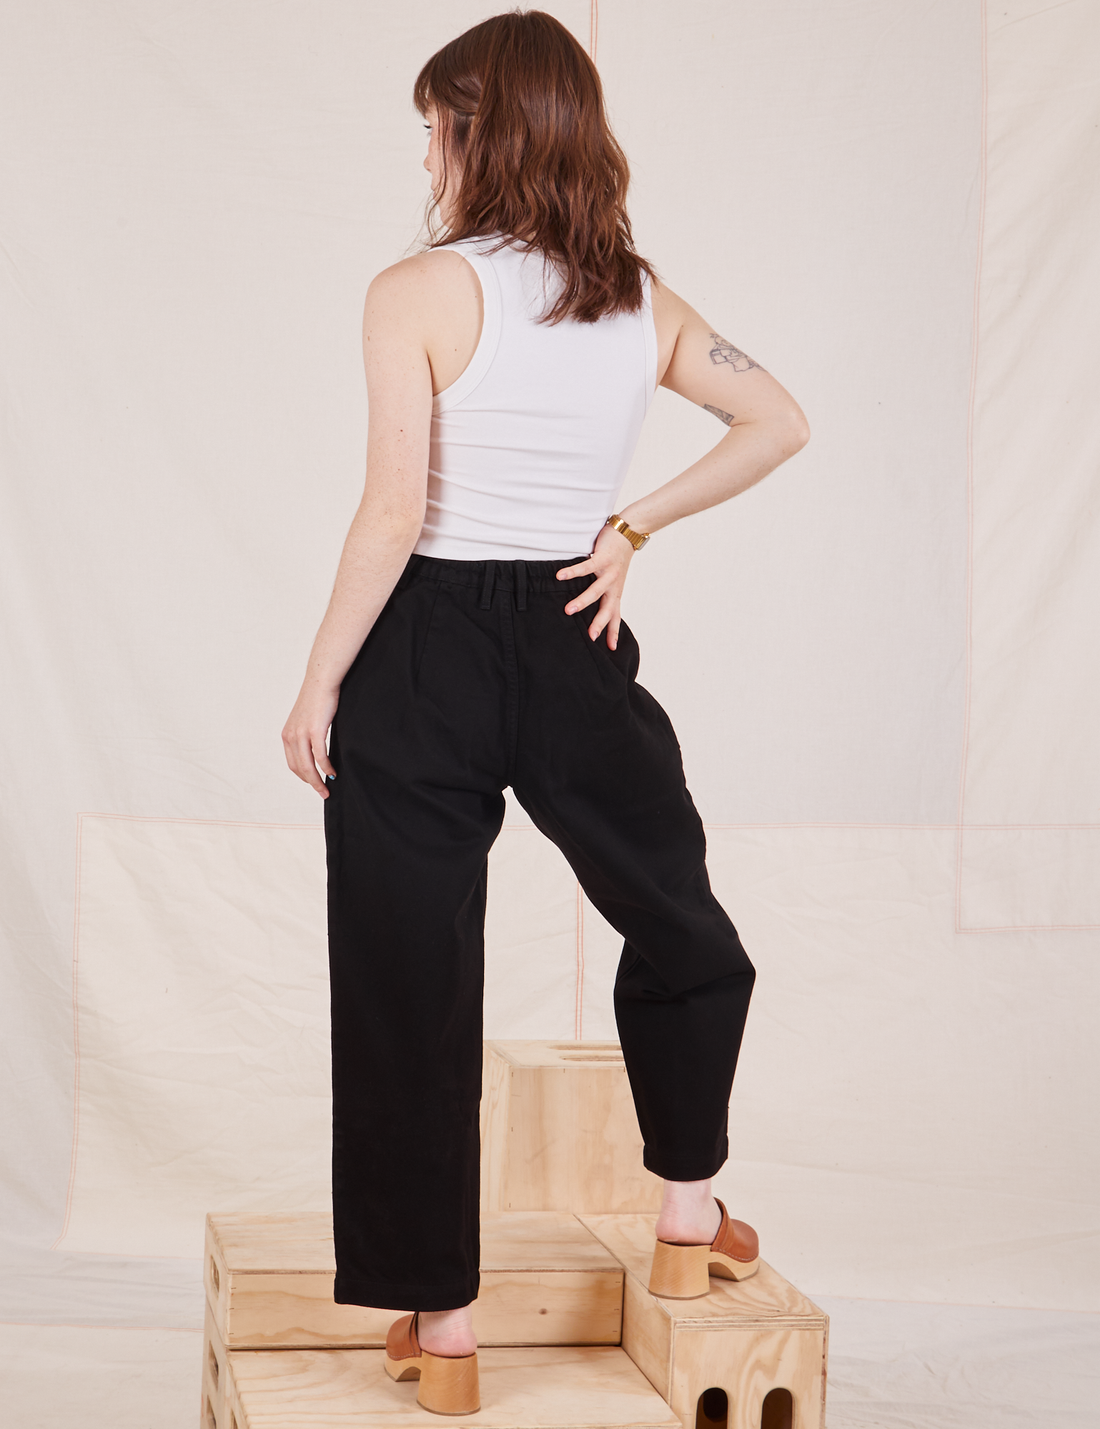 Back view of Denim Trouser Jeans in Black with vintage off-white Cropped Tank Top on Hana